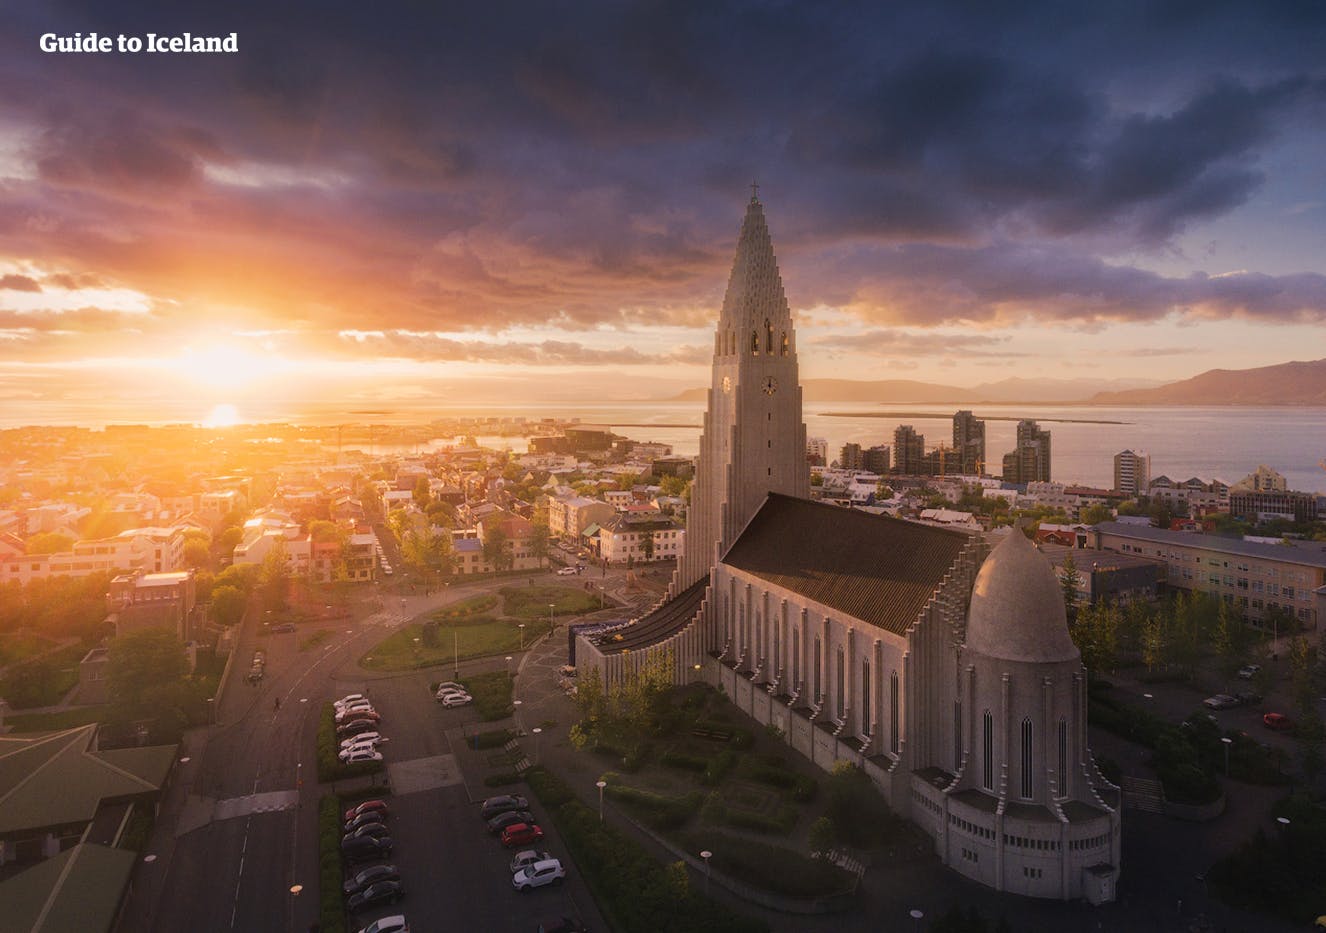 Welcome to Reykjavík, the world's northernmost capital.